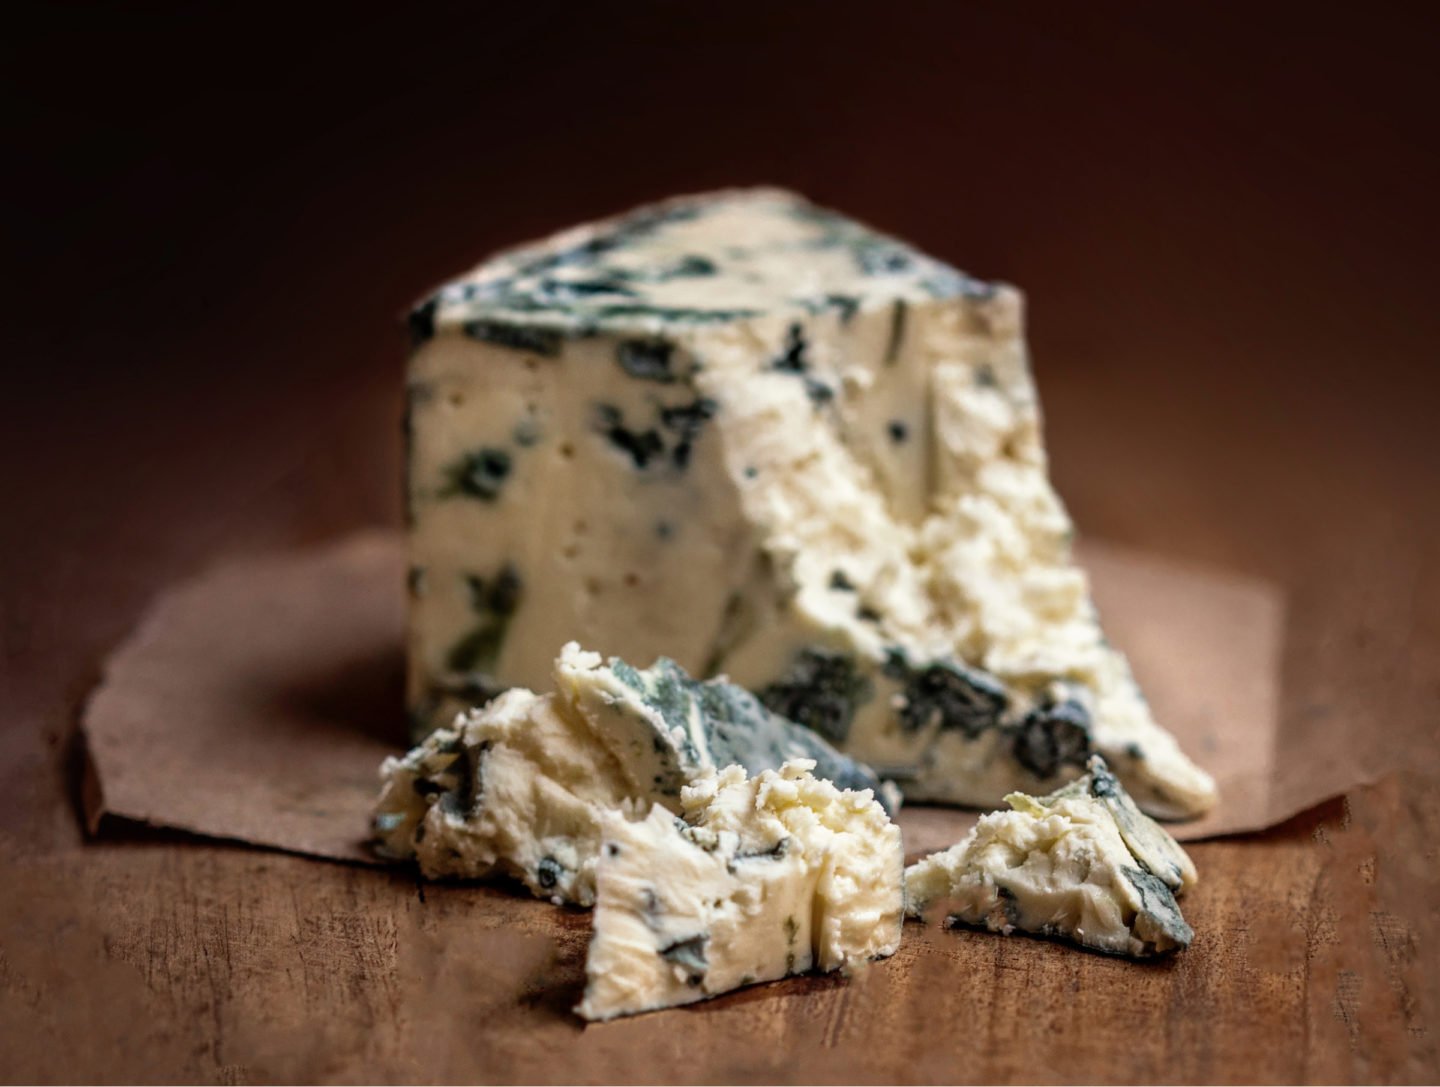 Gorgonzola Cheese With Crumbled Pieces